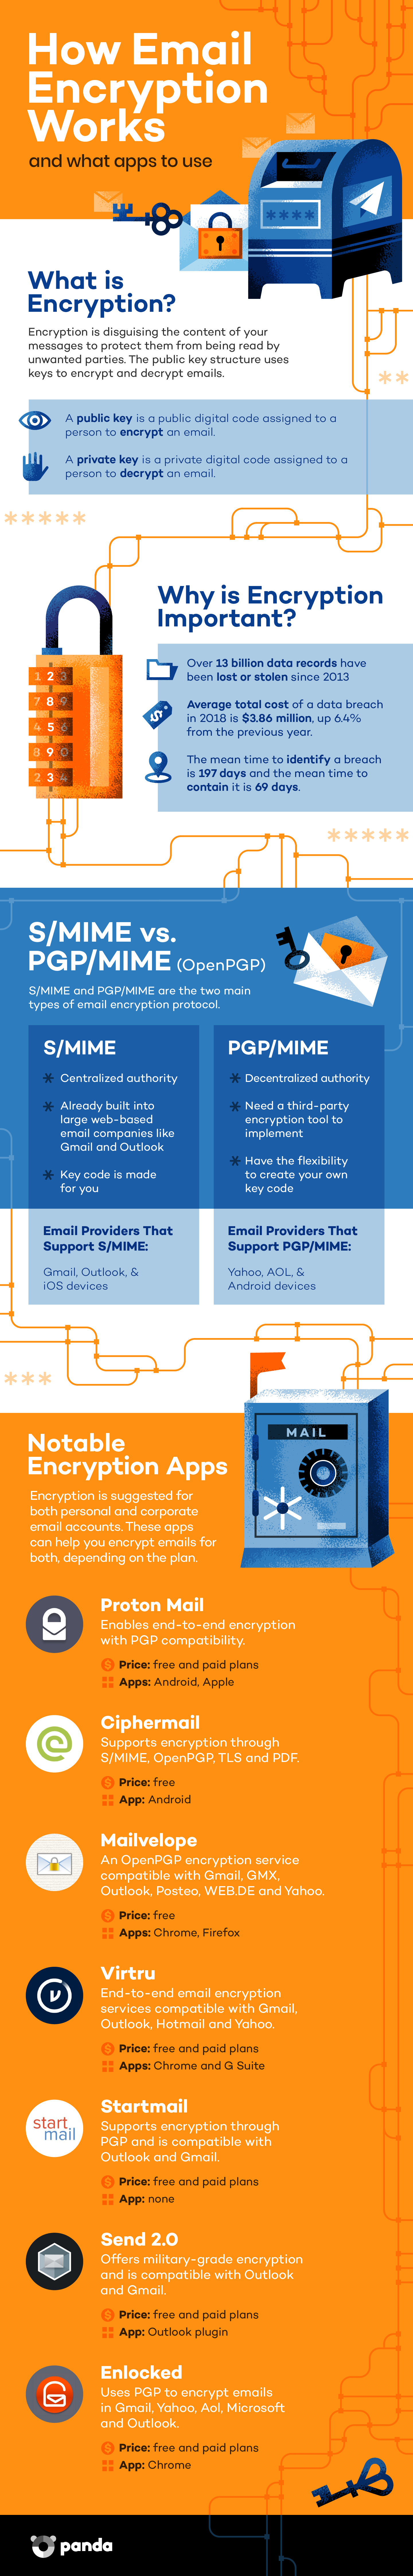 How to encrypt email